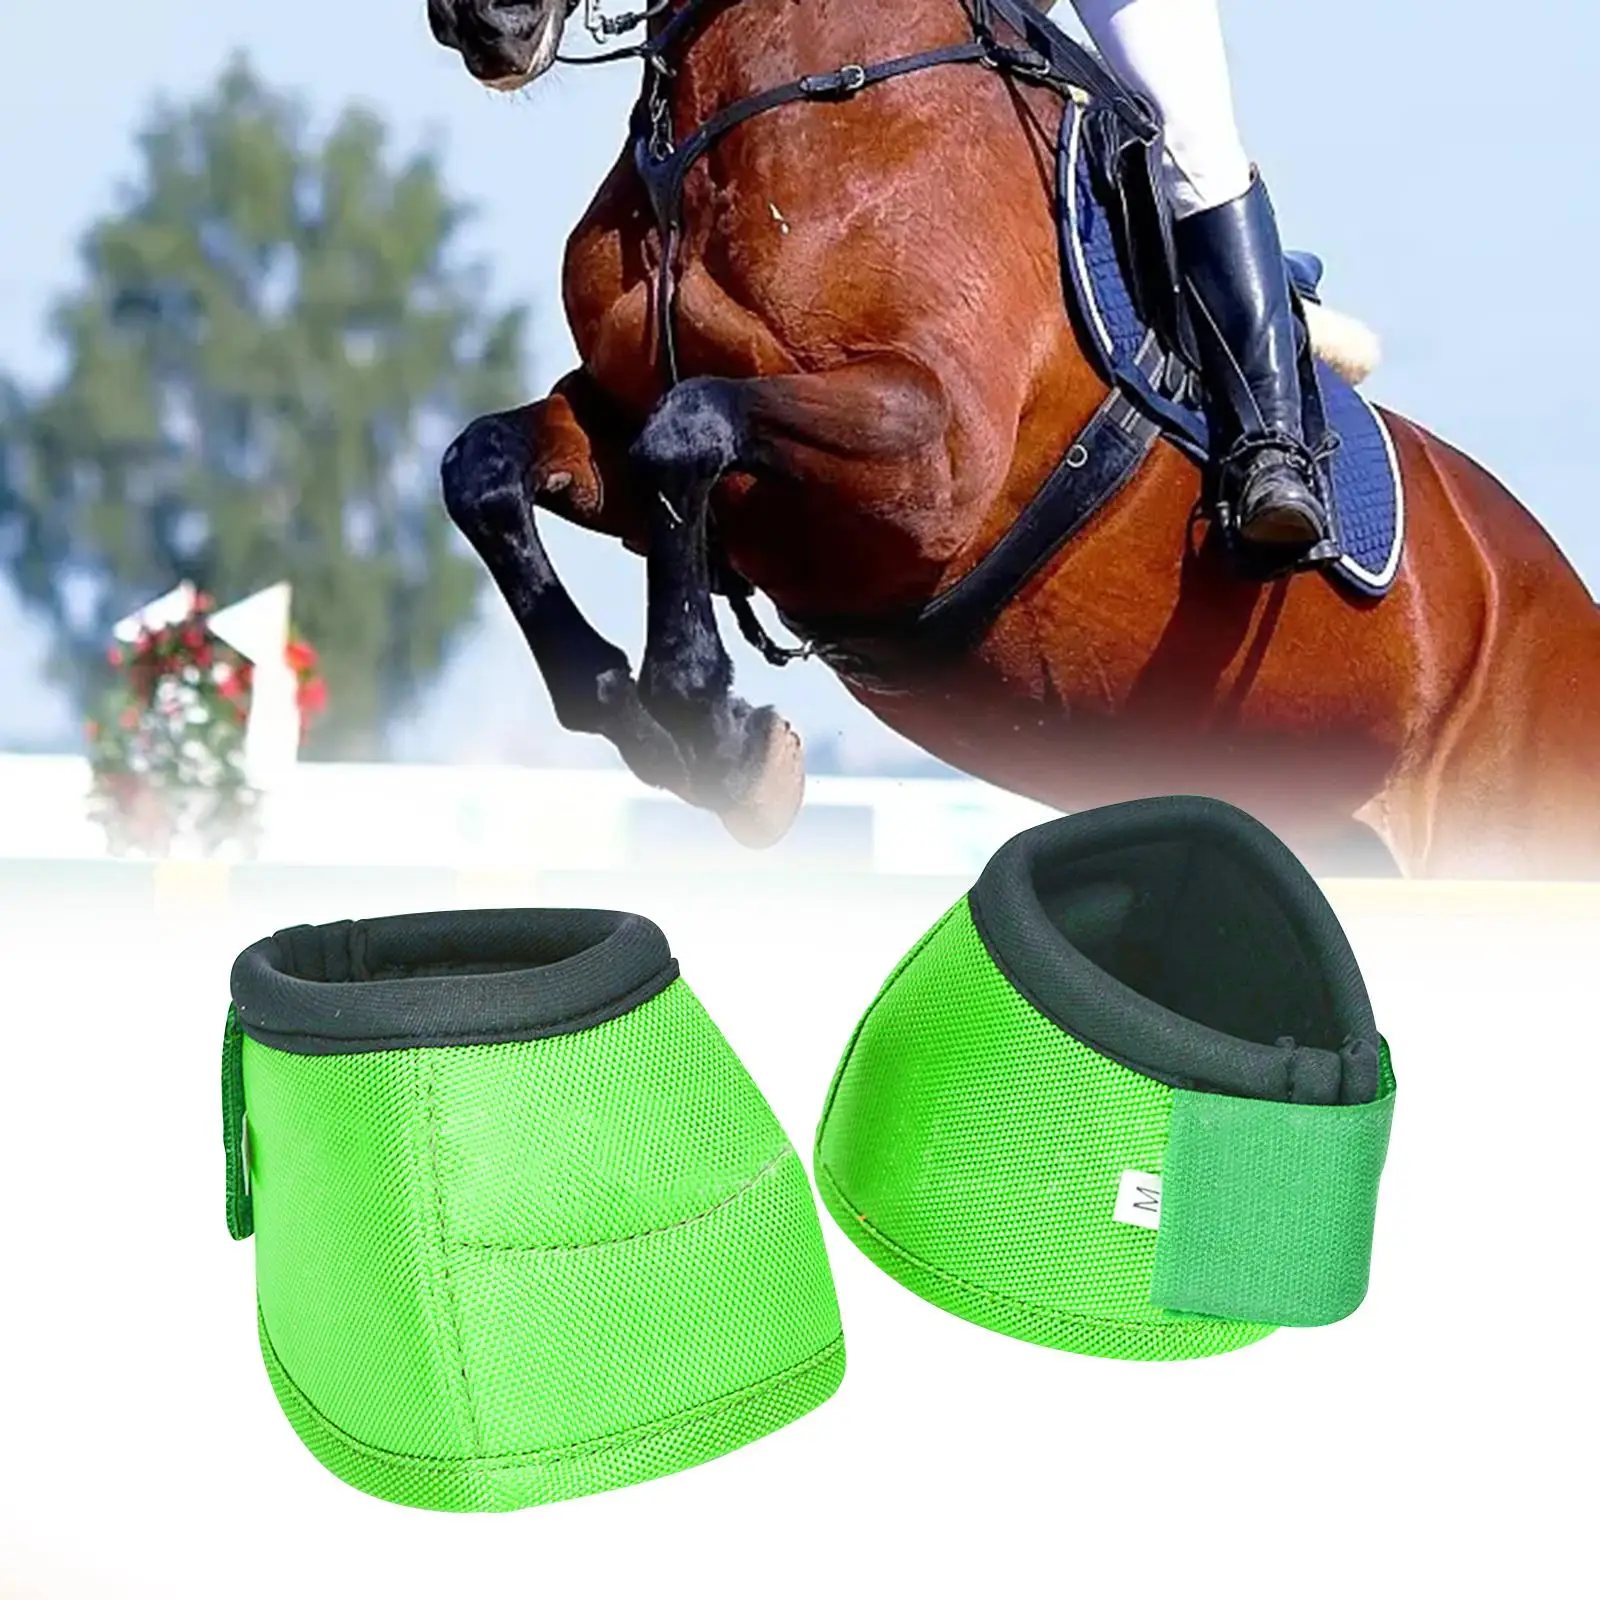 2Pcs Horse Bell Boots Horse Care Boot Hoof Protection for Riding and Turnout